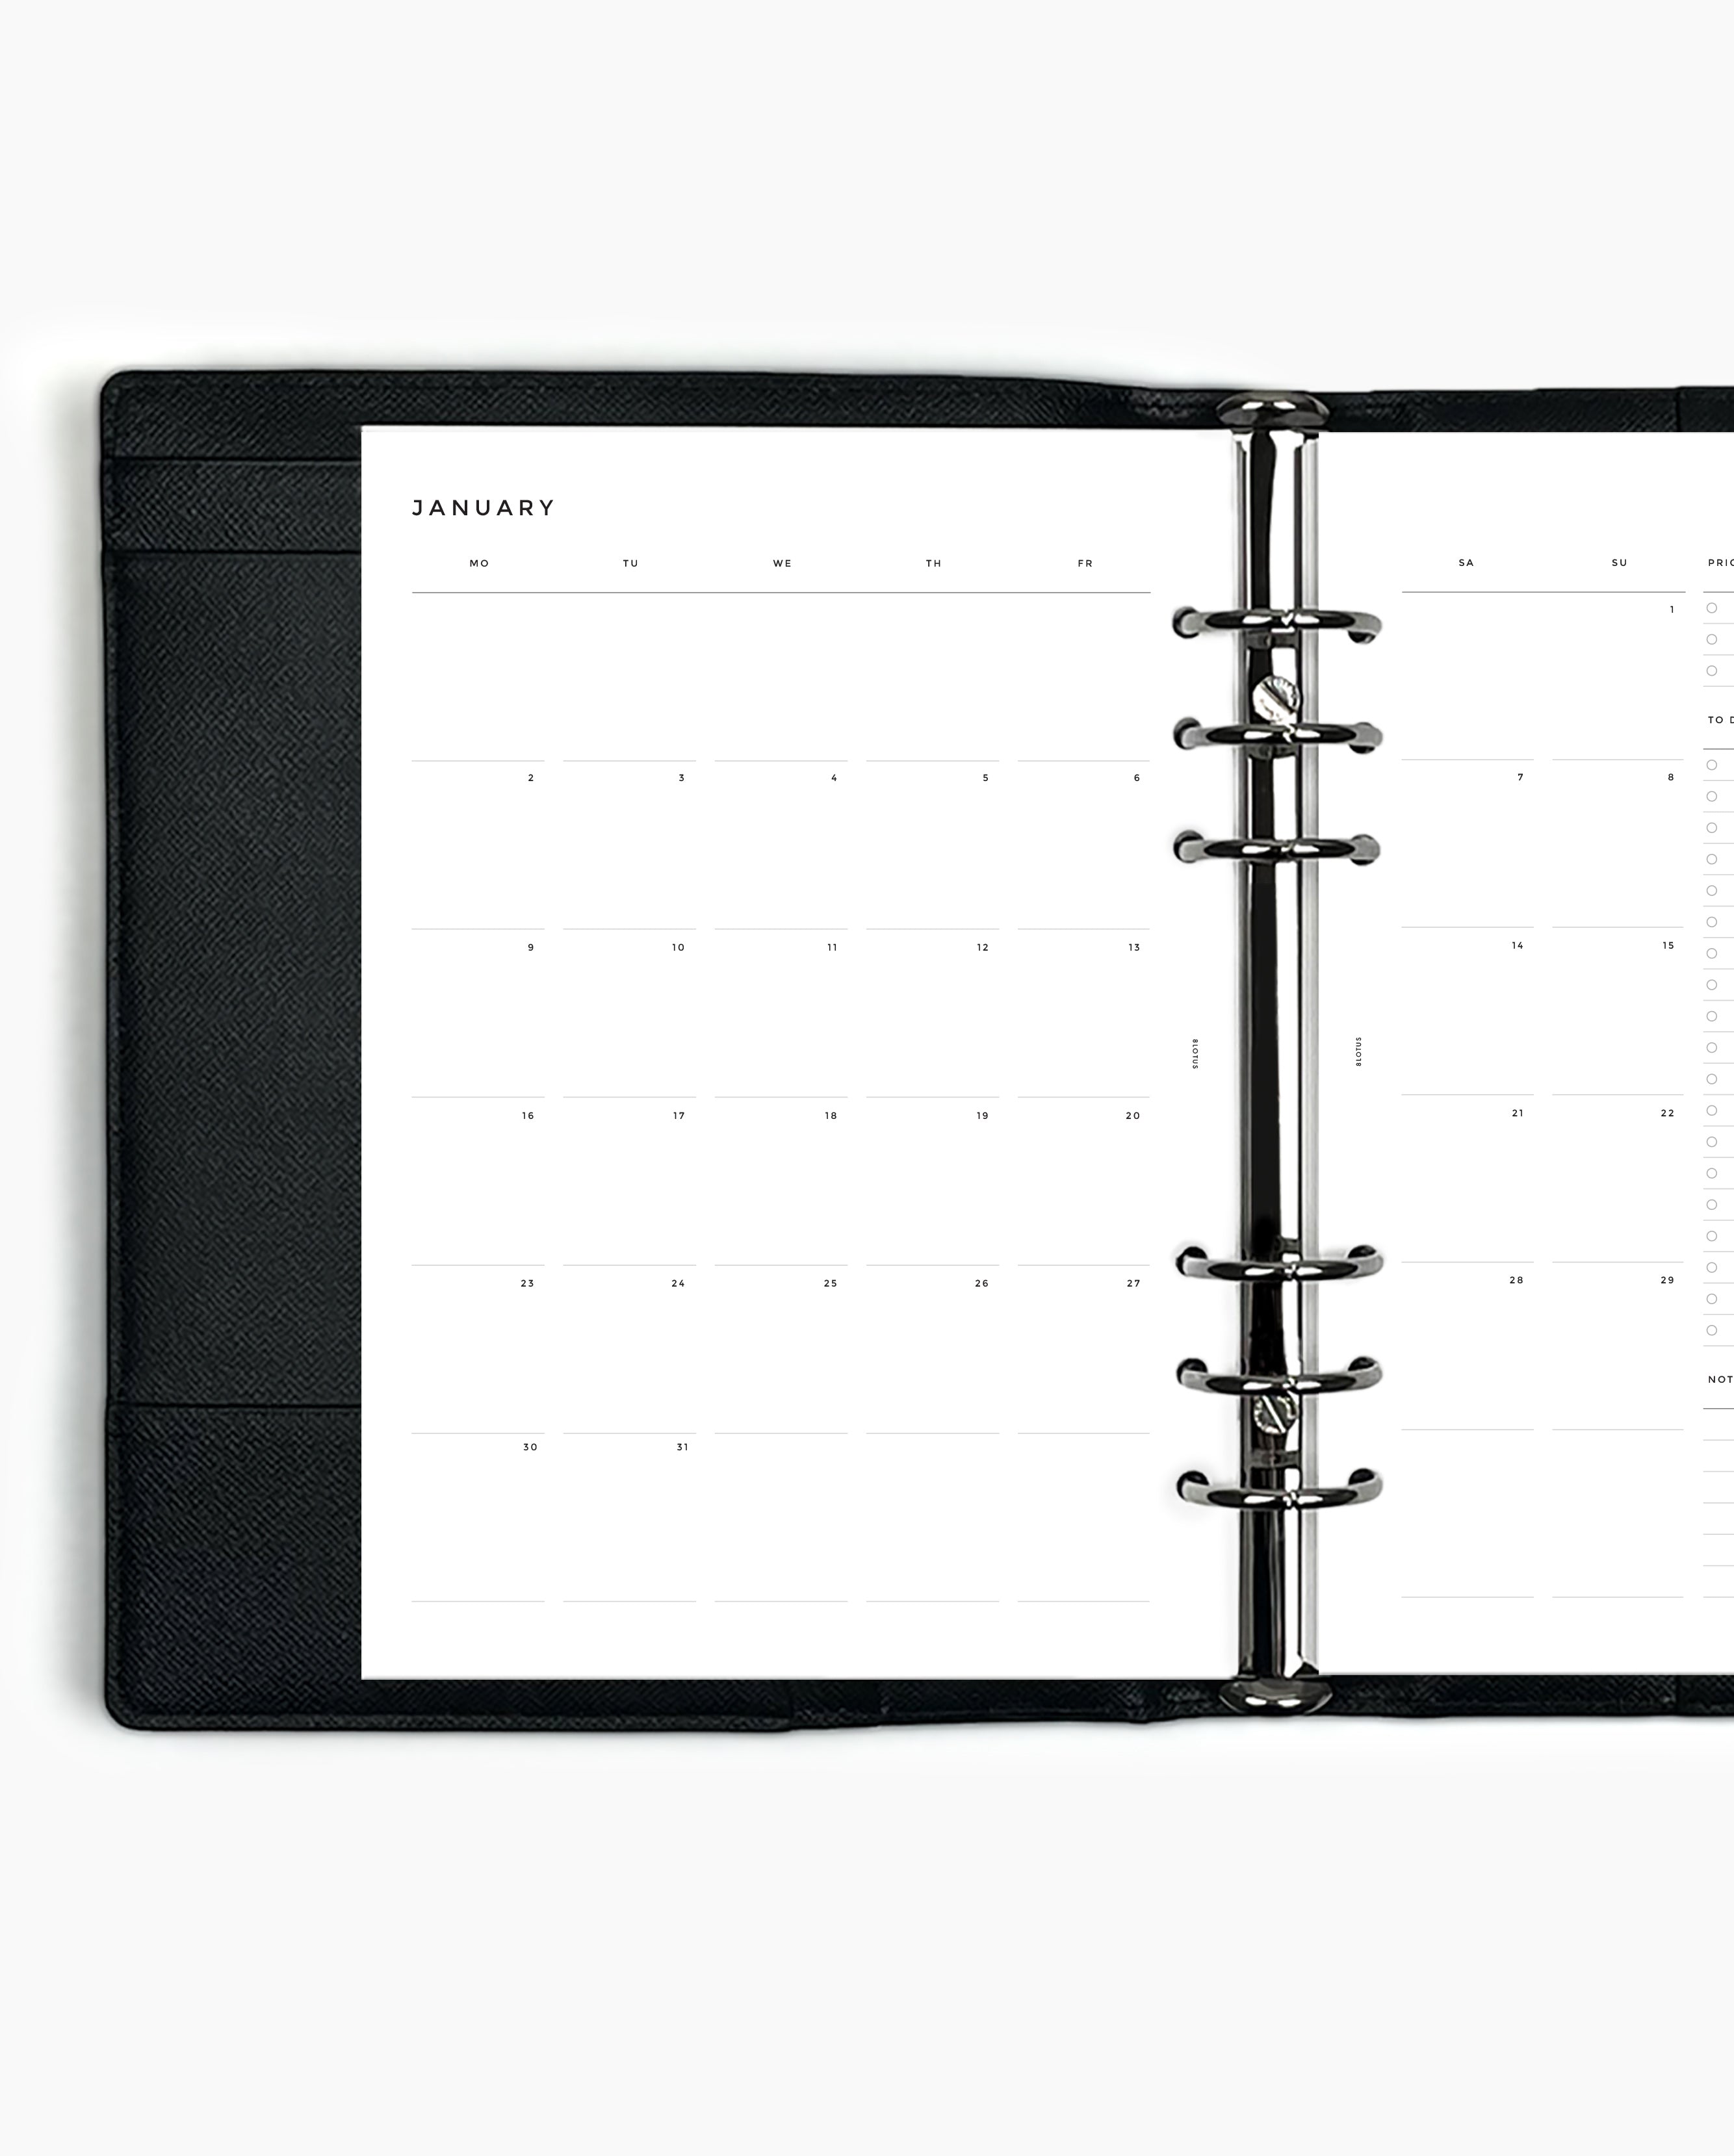 MN058 - 2023 Monthly Planner - MO4P